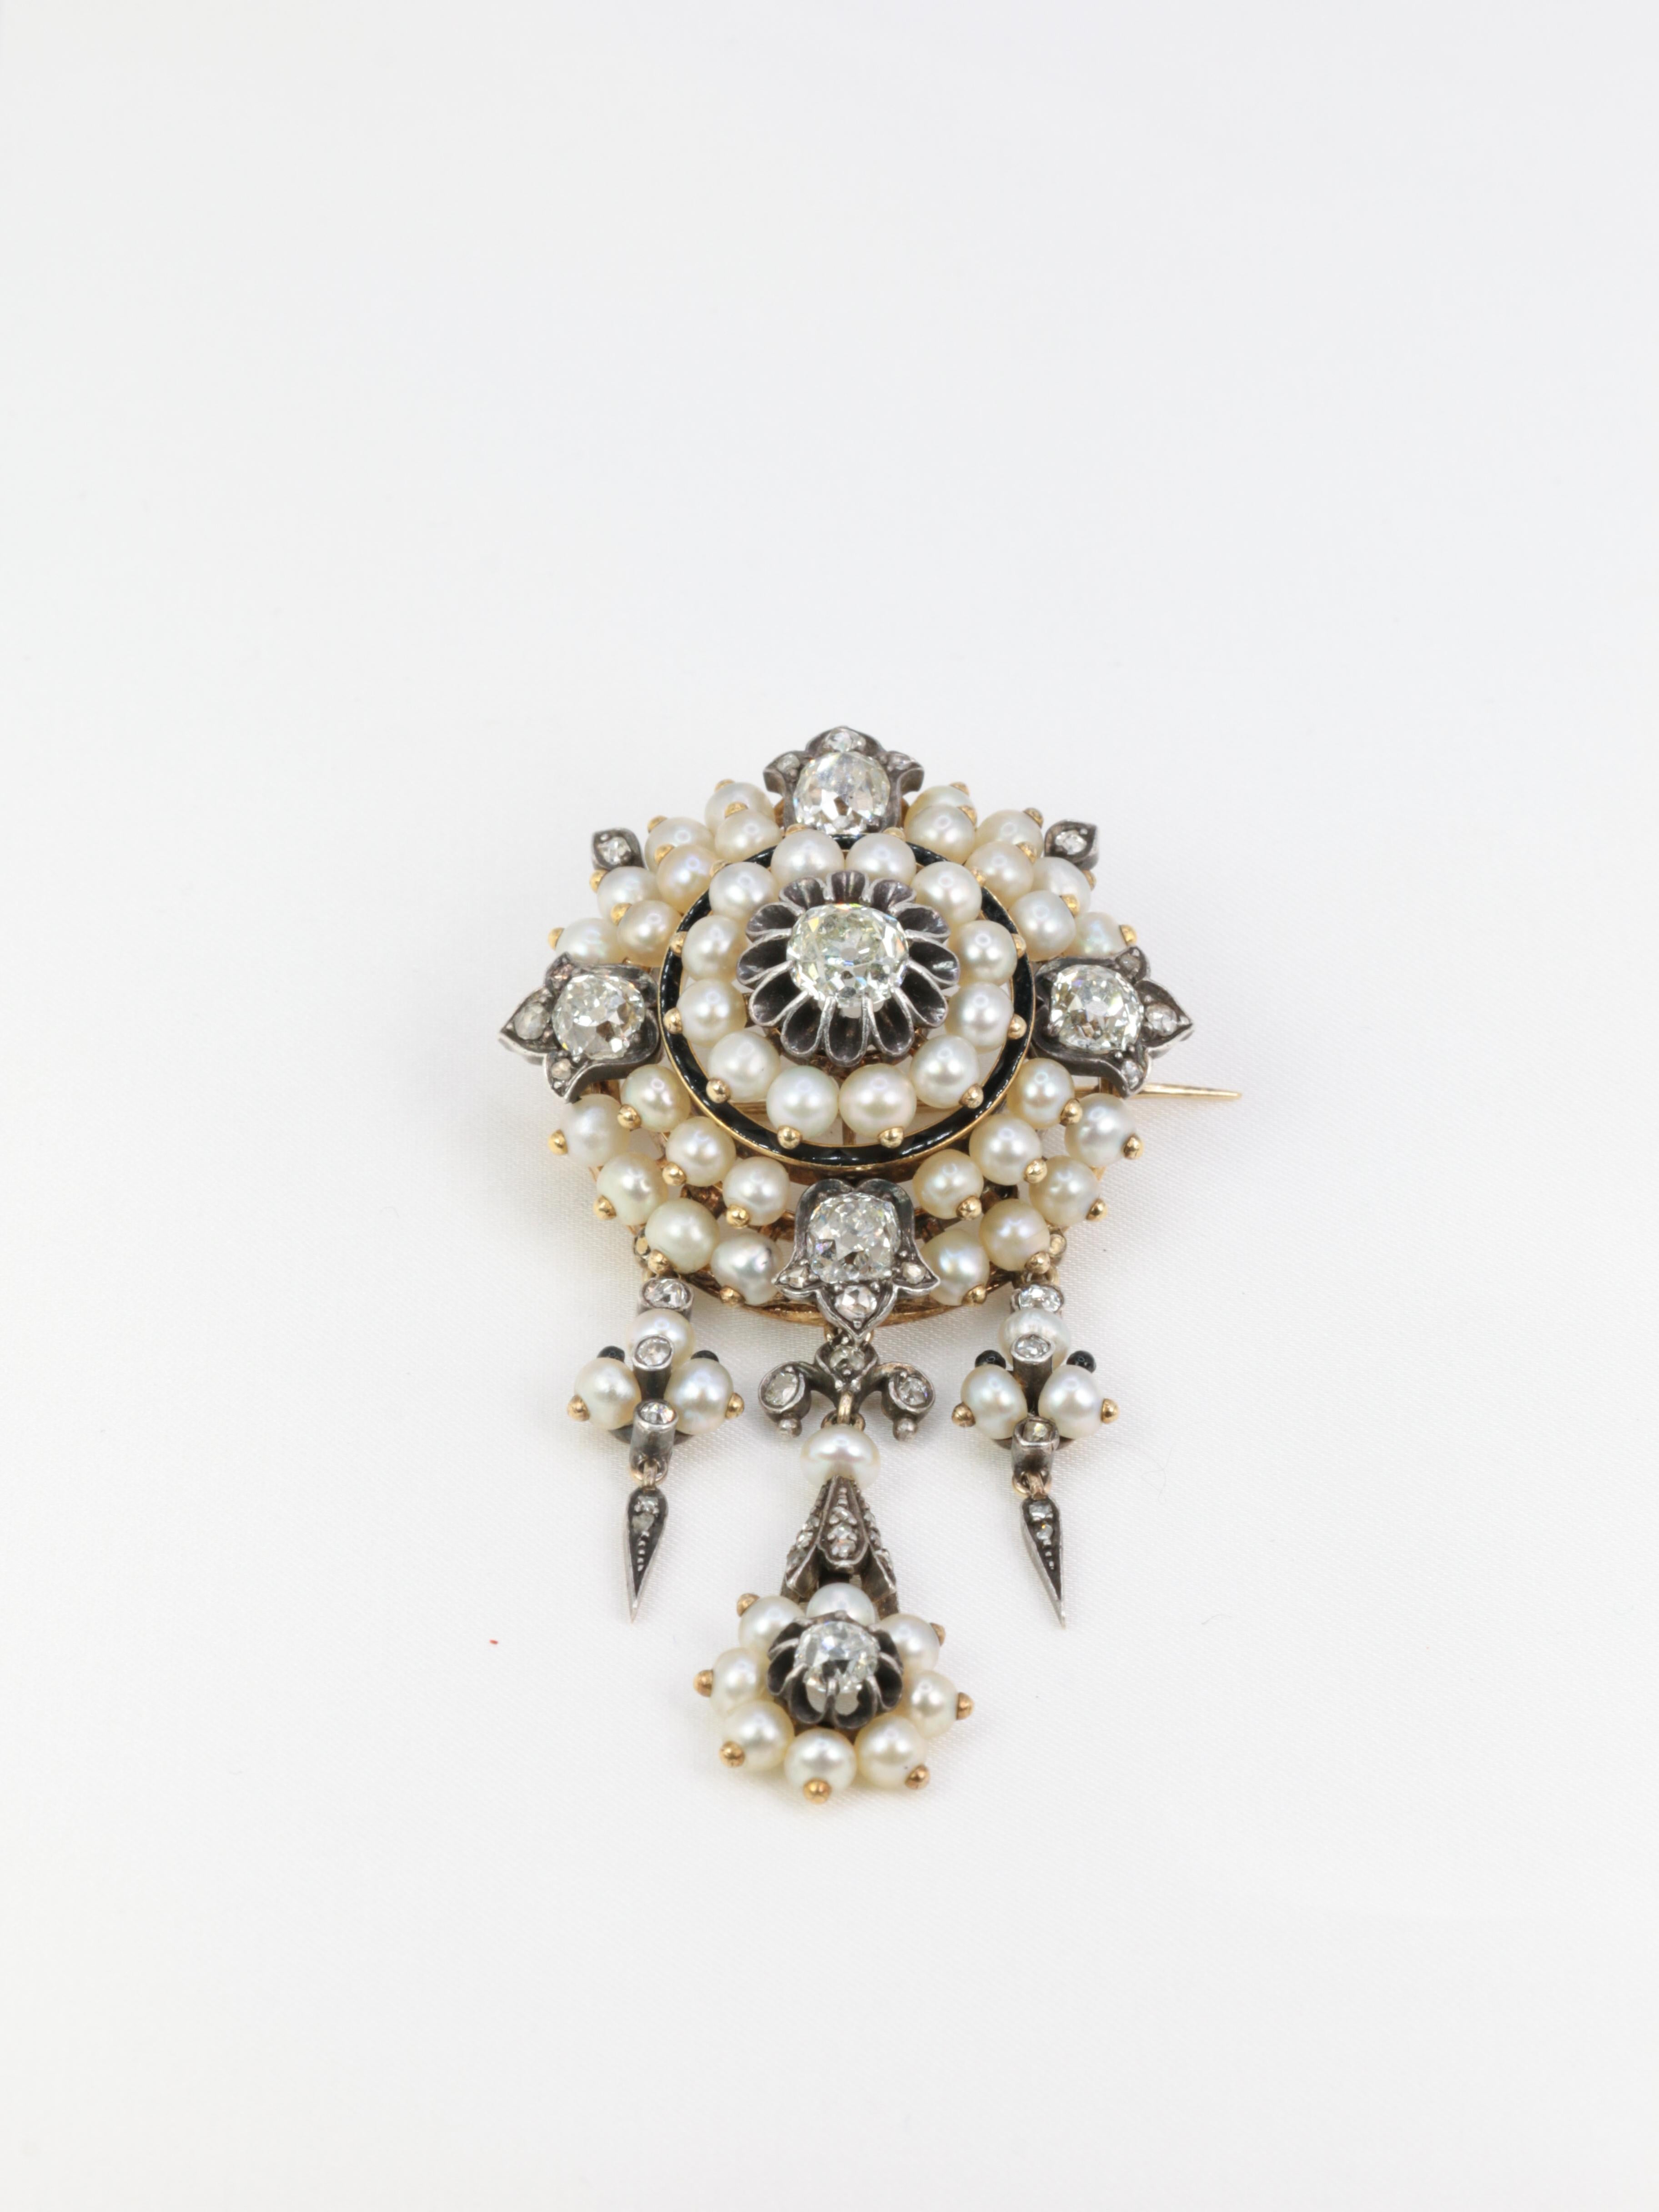 Gold Antique Brooch / Corsage Front with Silver, Diamonds, Fine Pearls and Ename For Sale 1